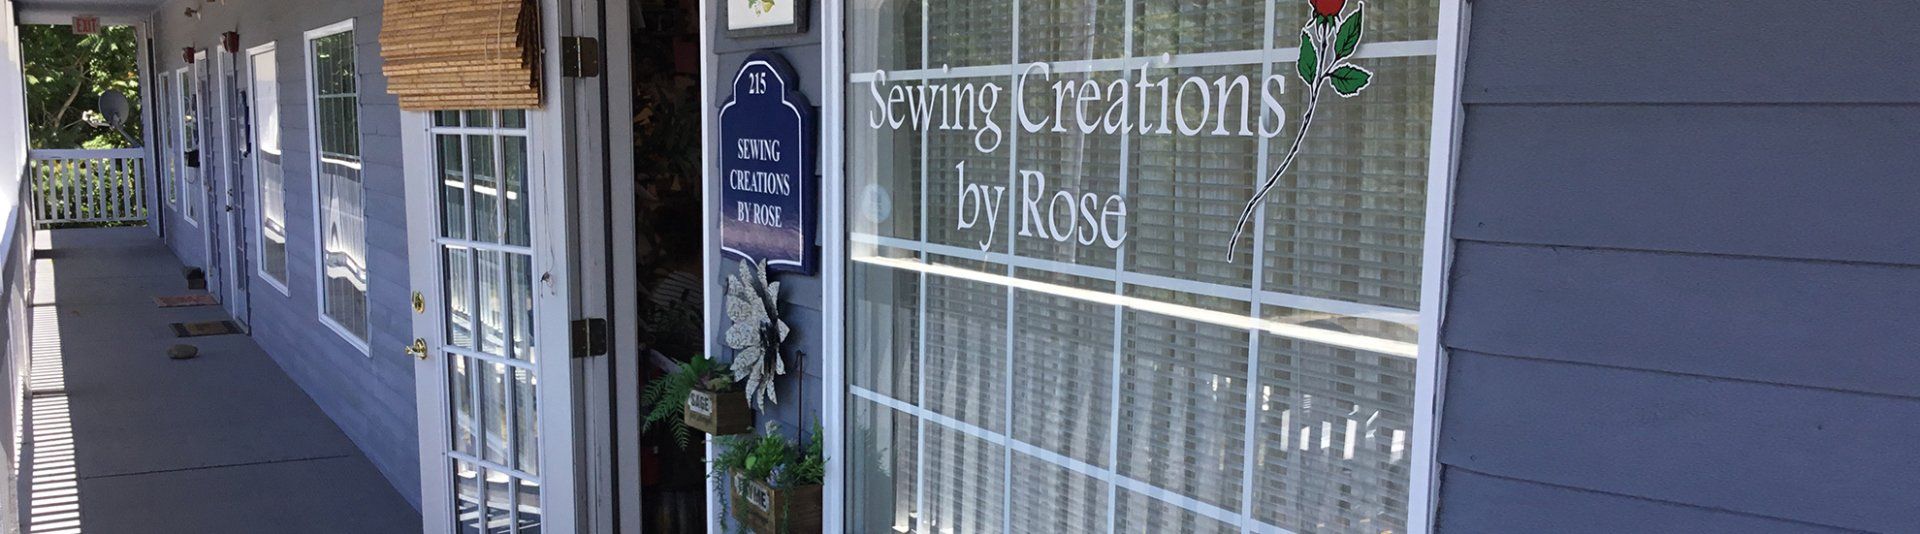 Sewing Creations By Rose shop